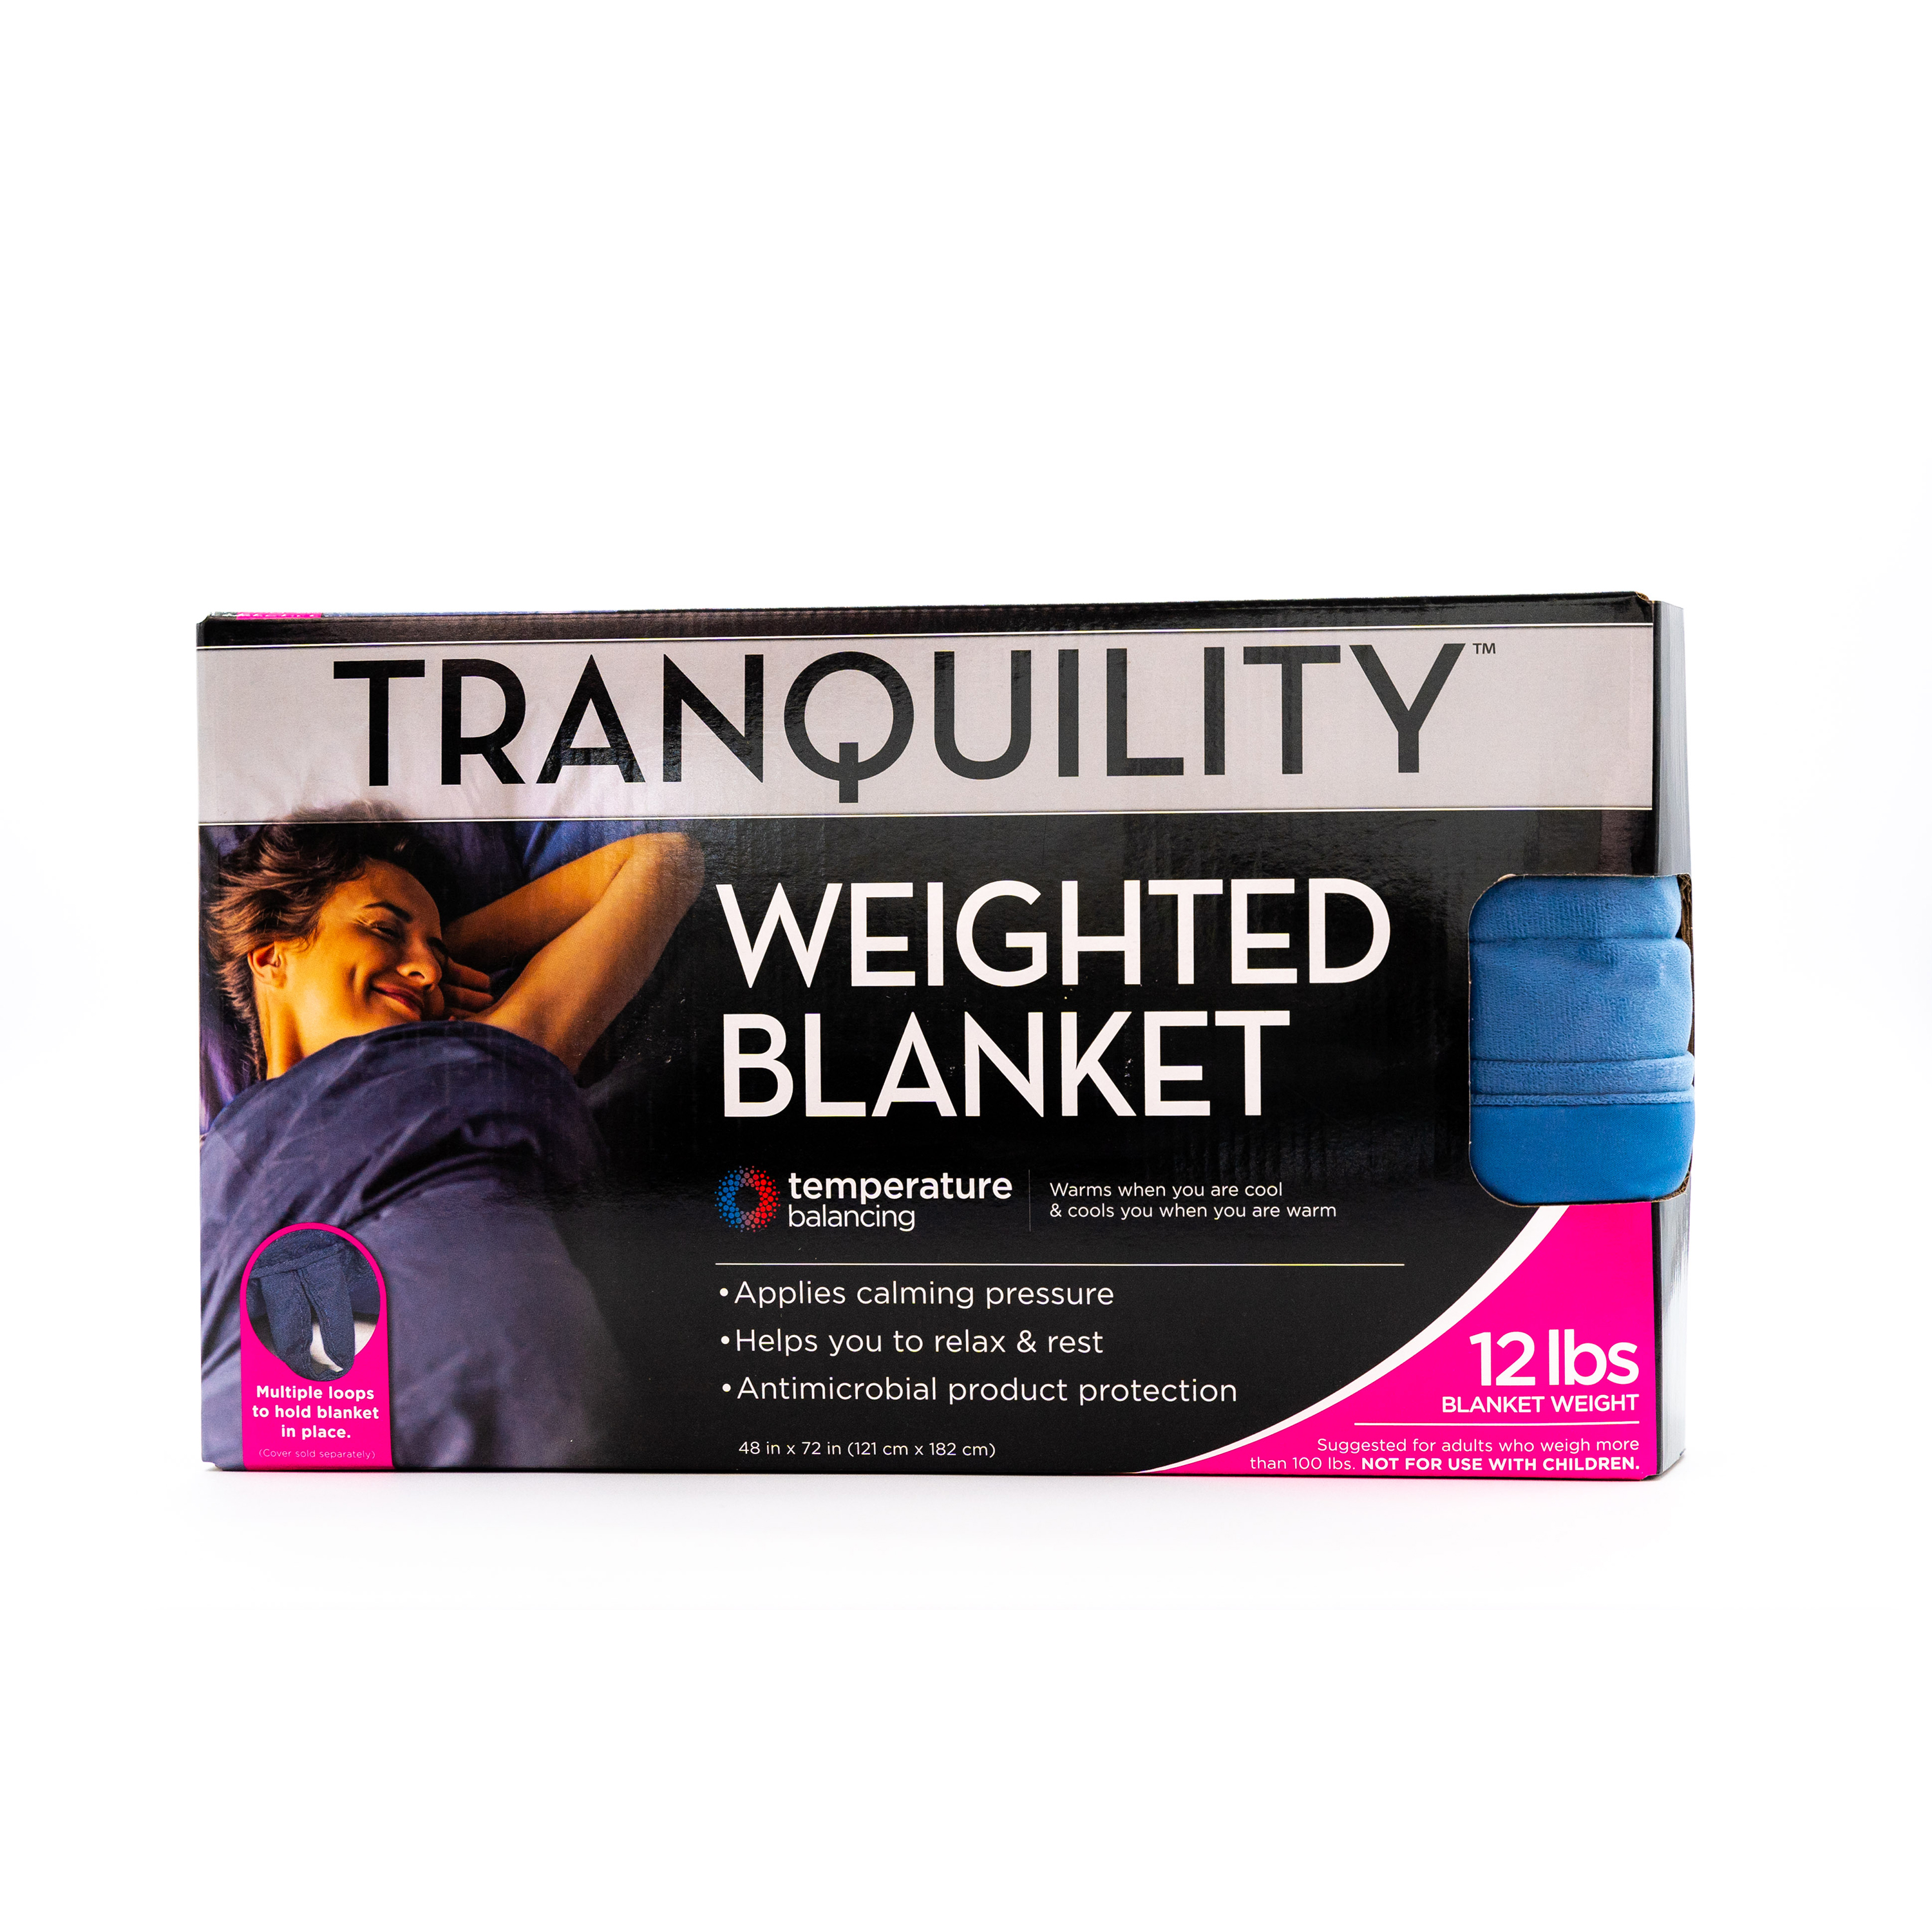 Tranquility Temperature Balancing 12lb Weighted Blanket, Midnight Blue - image 3 of 6